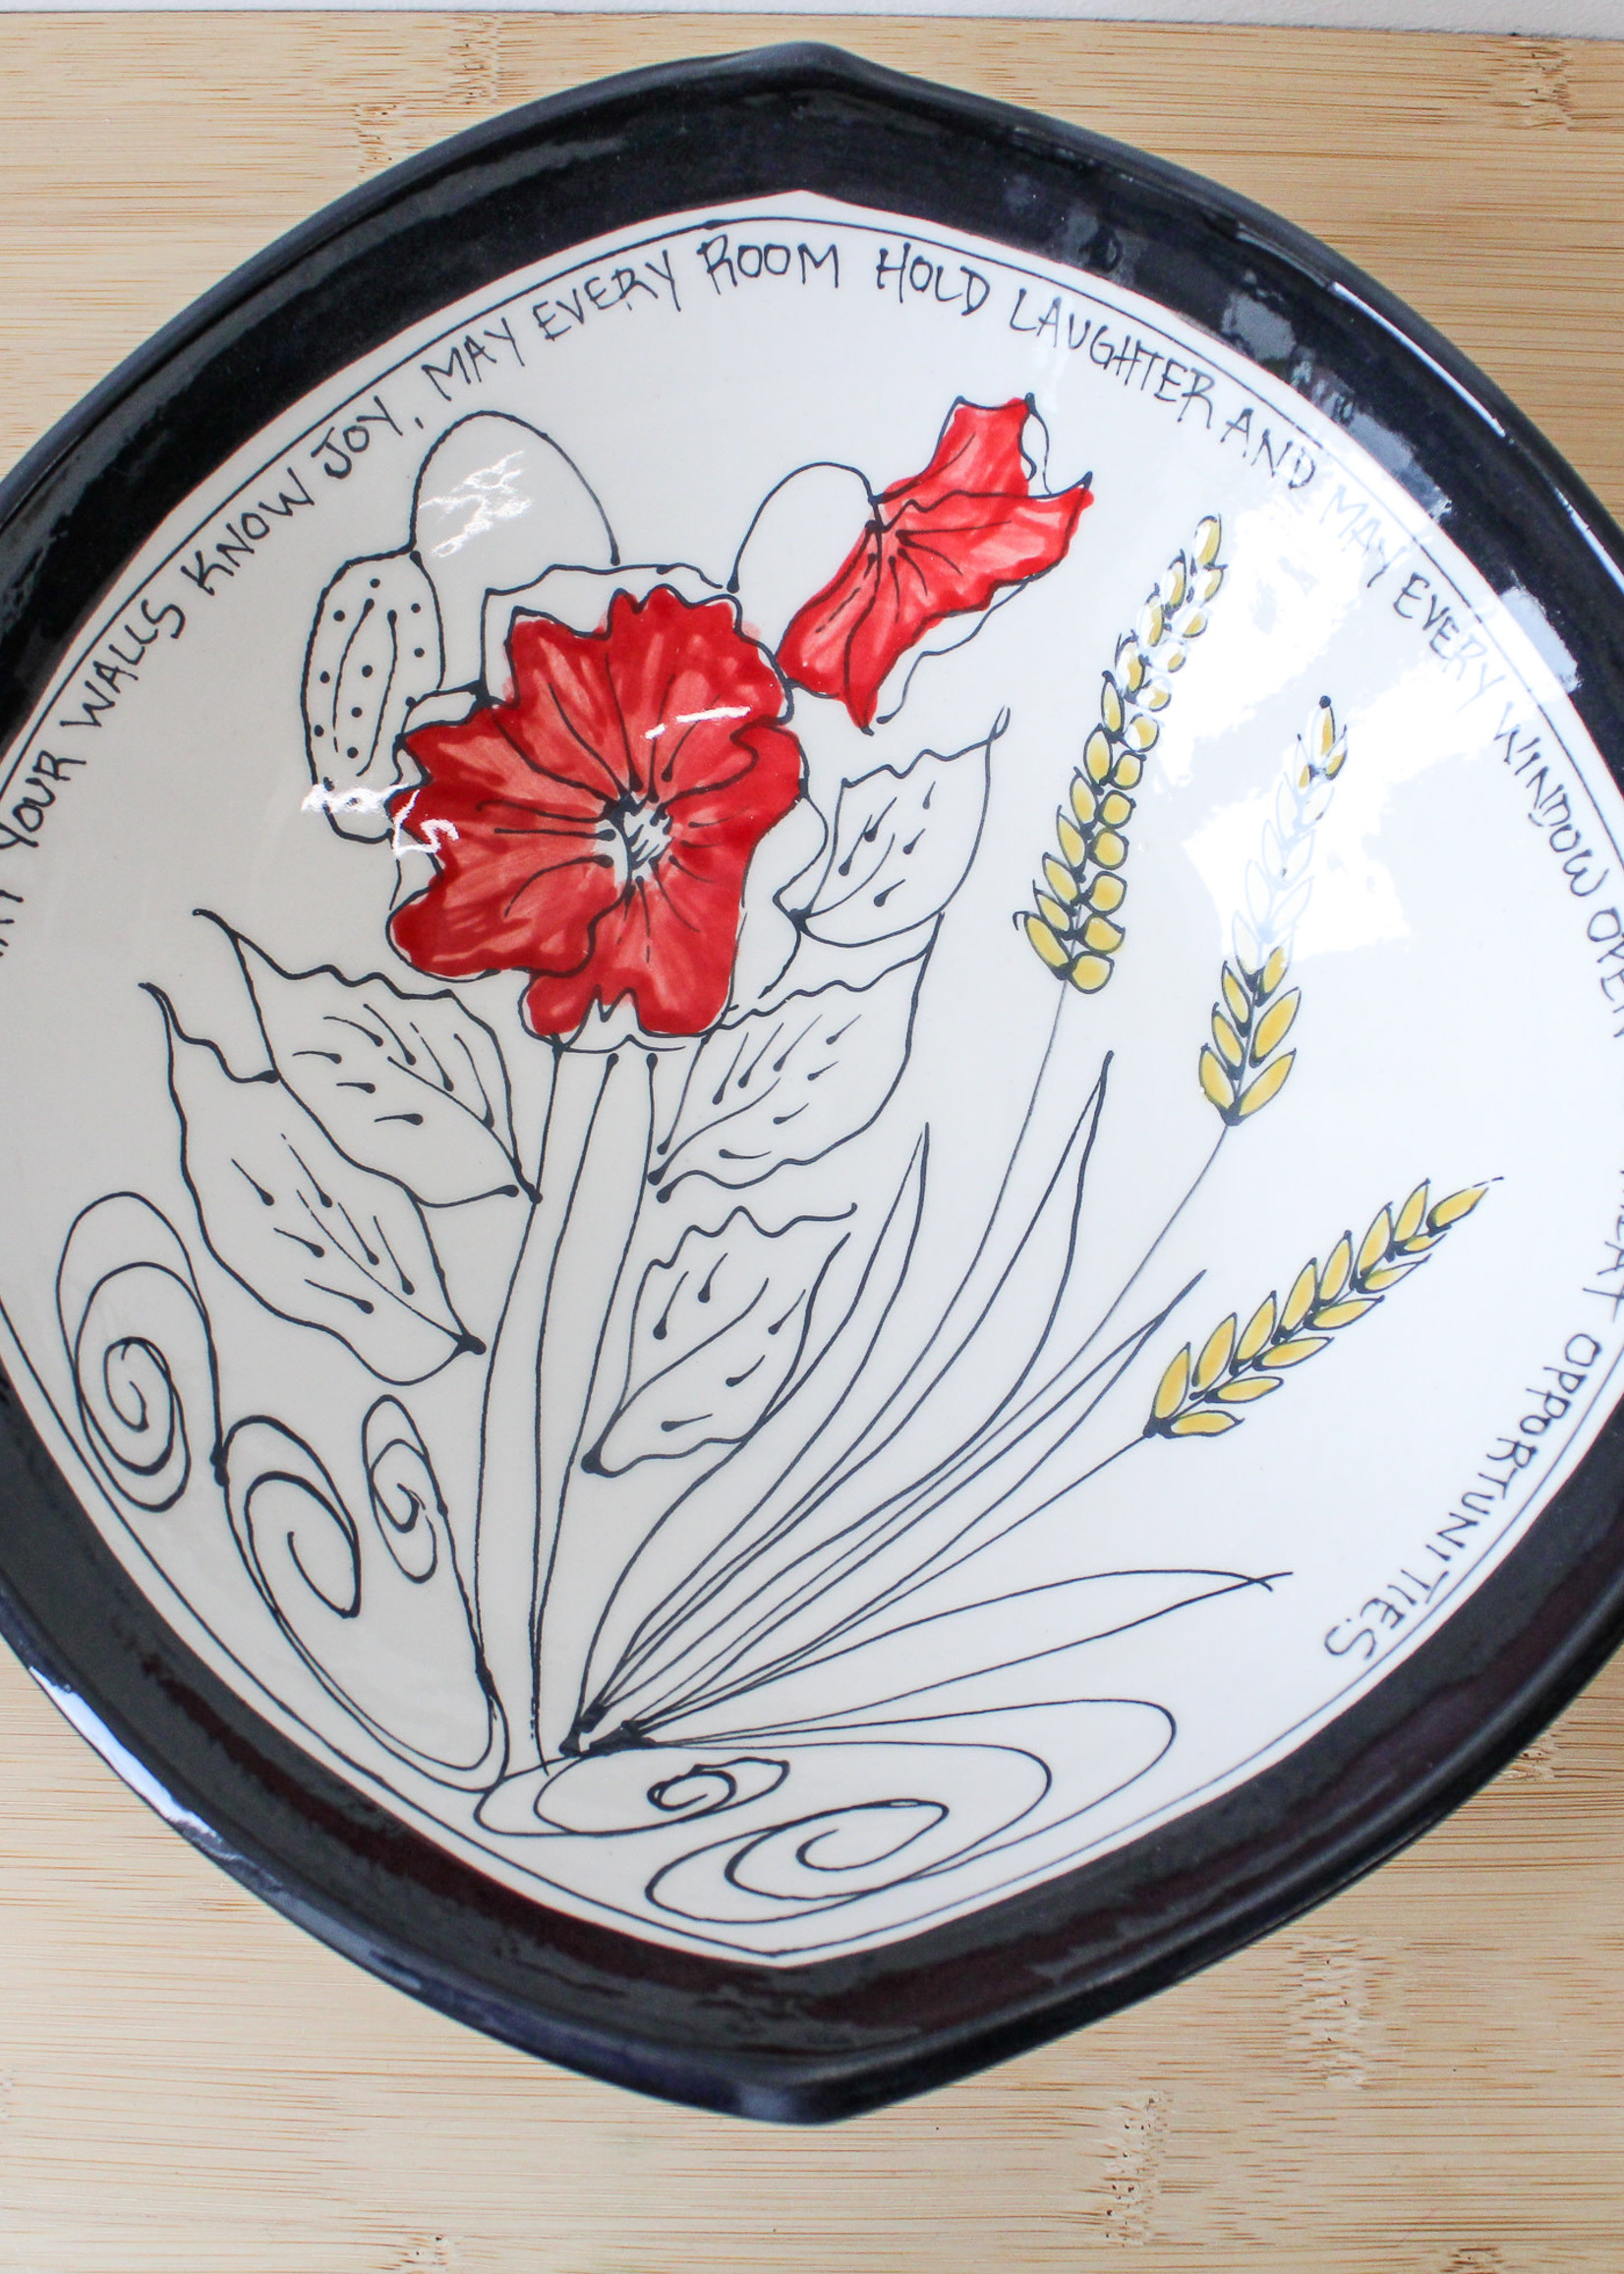 CERAMICS - 8 1/2 " Bowl with Poppies & Wheat